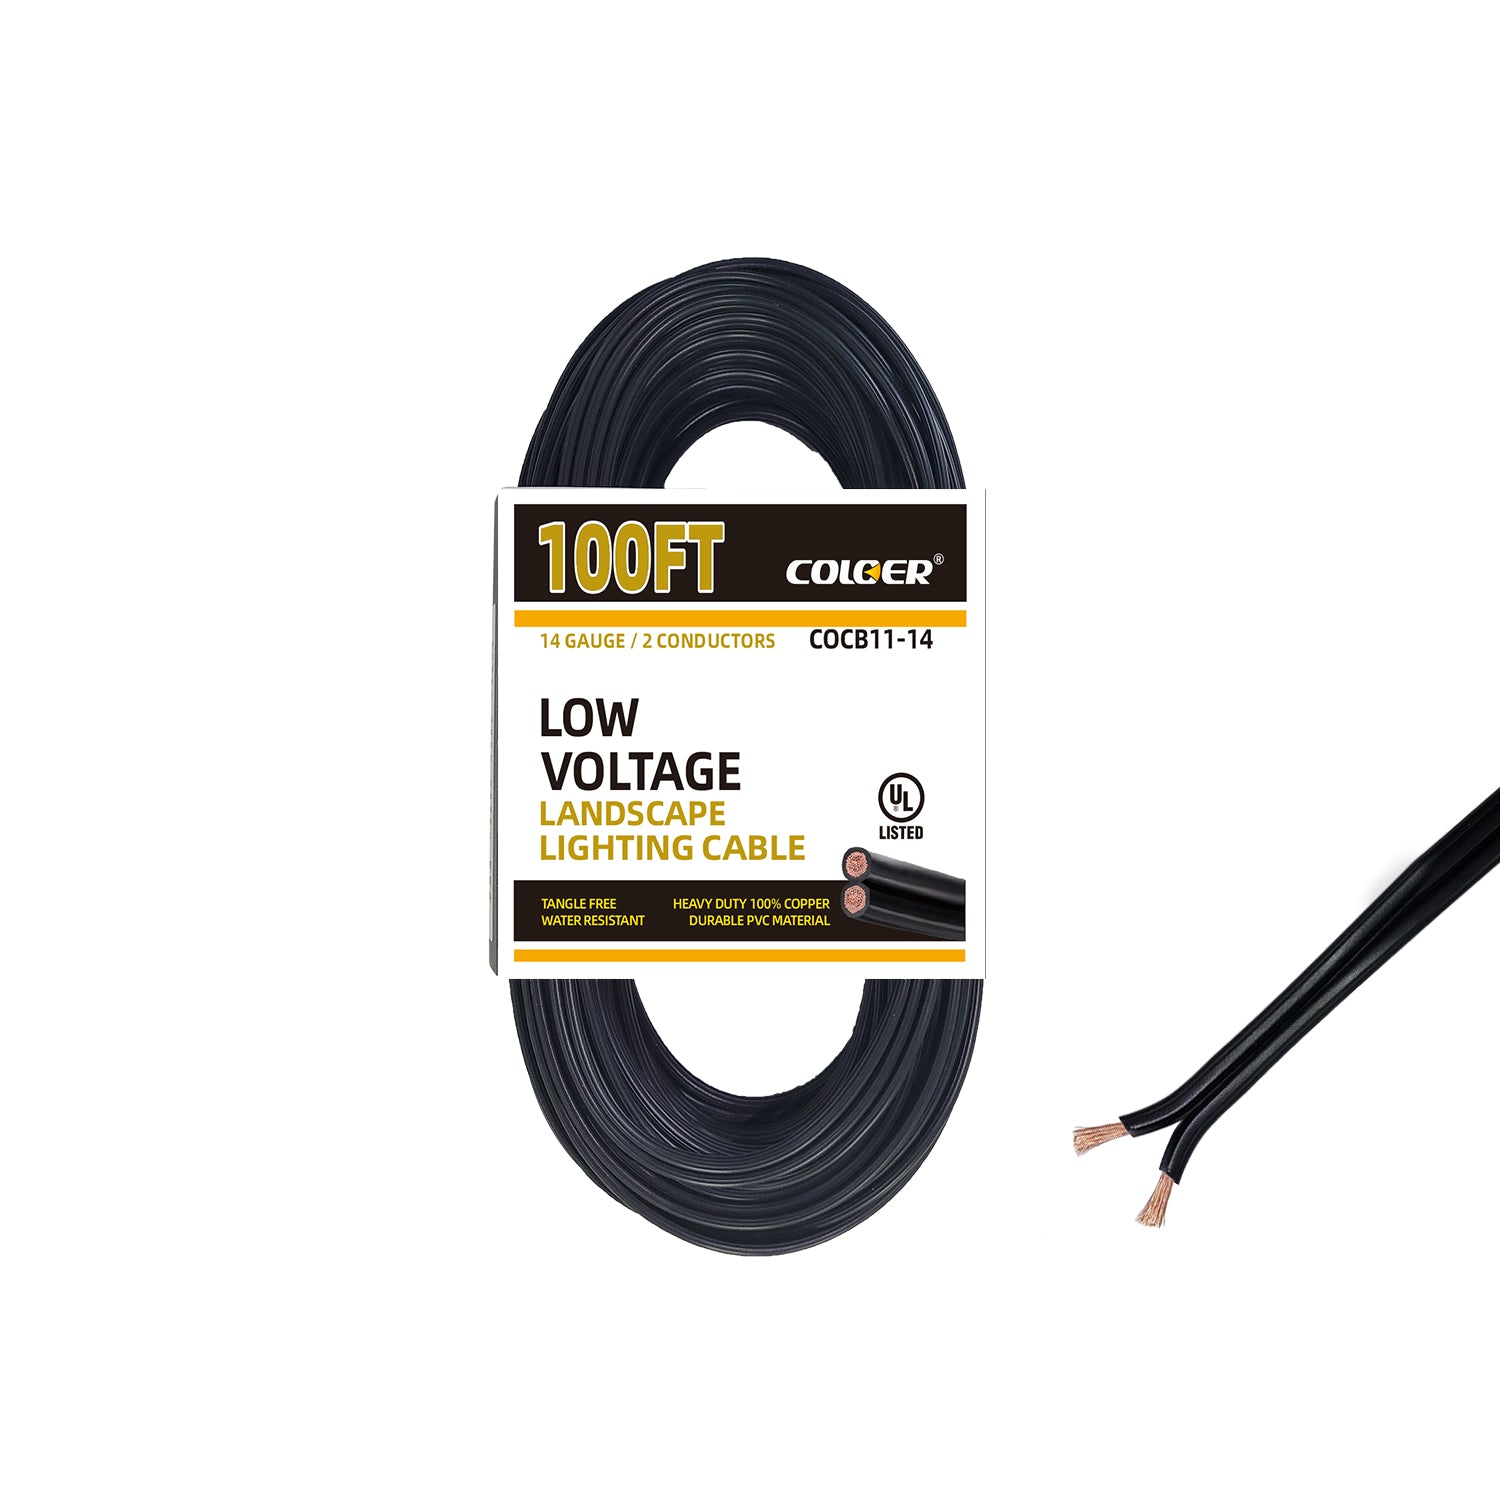 100-foot roll of COLOER 14-gauge low voltage landscape lighting cable with 2 conductors, featuring tinned strip-free, heavy-duty solid copper and durable PVC insulation, ideal for landscape lighting